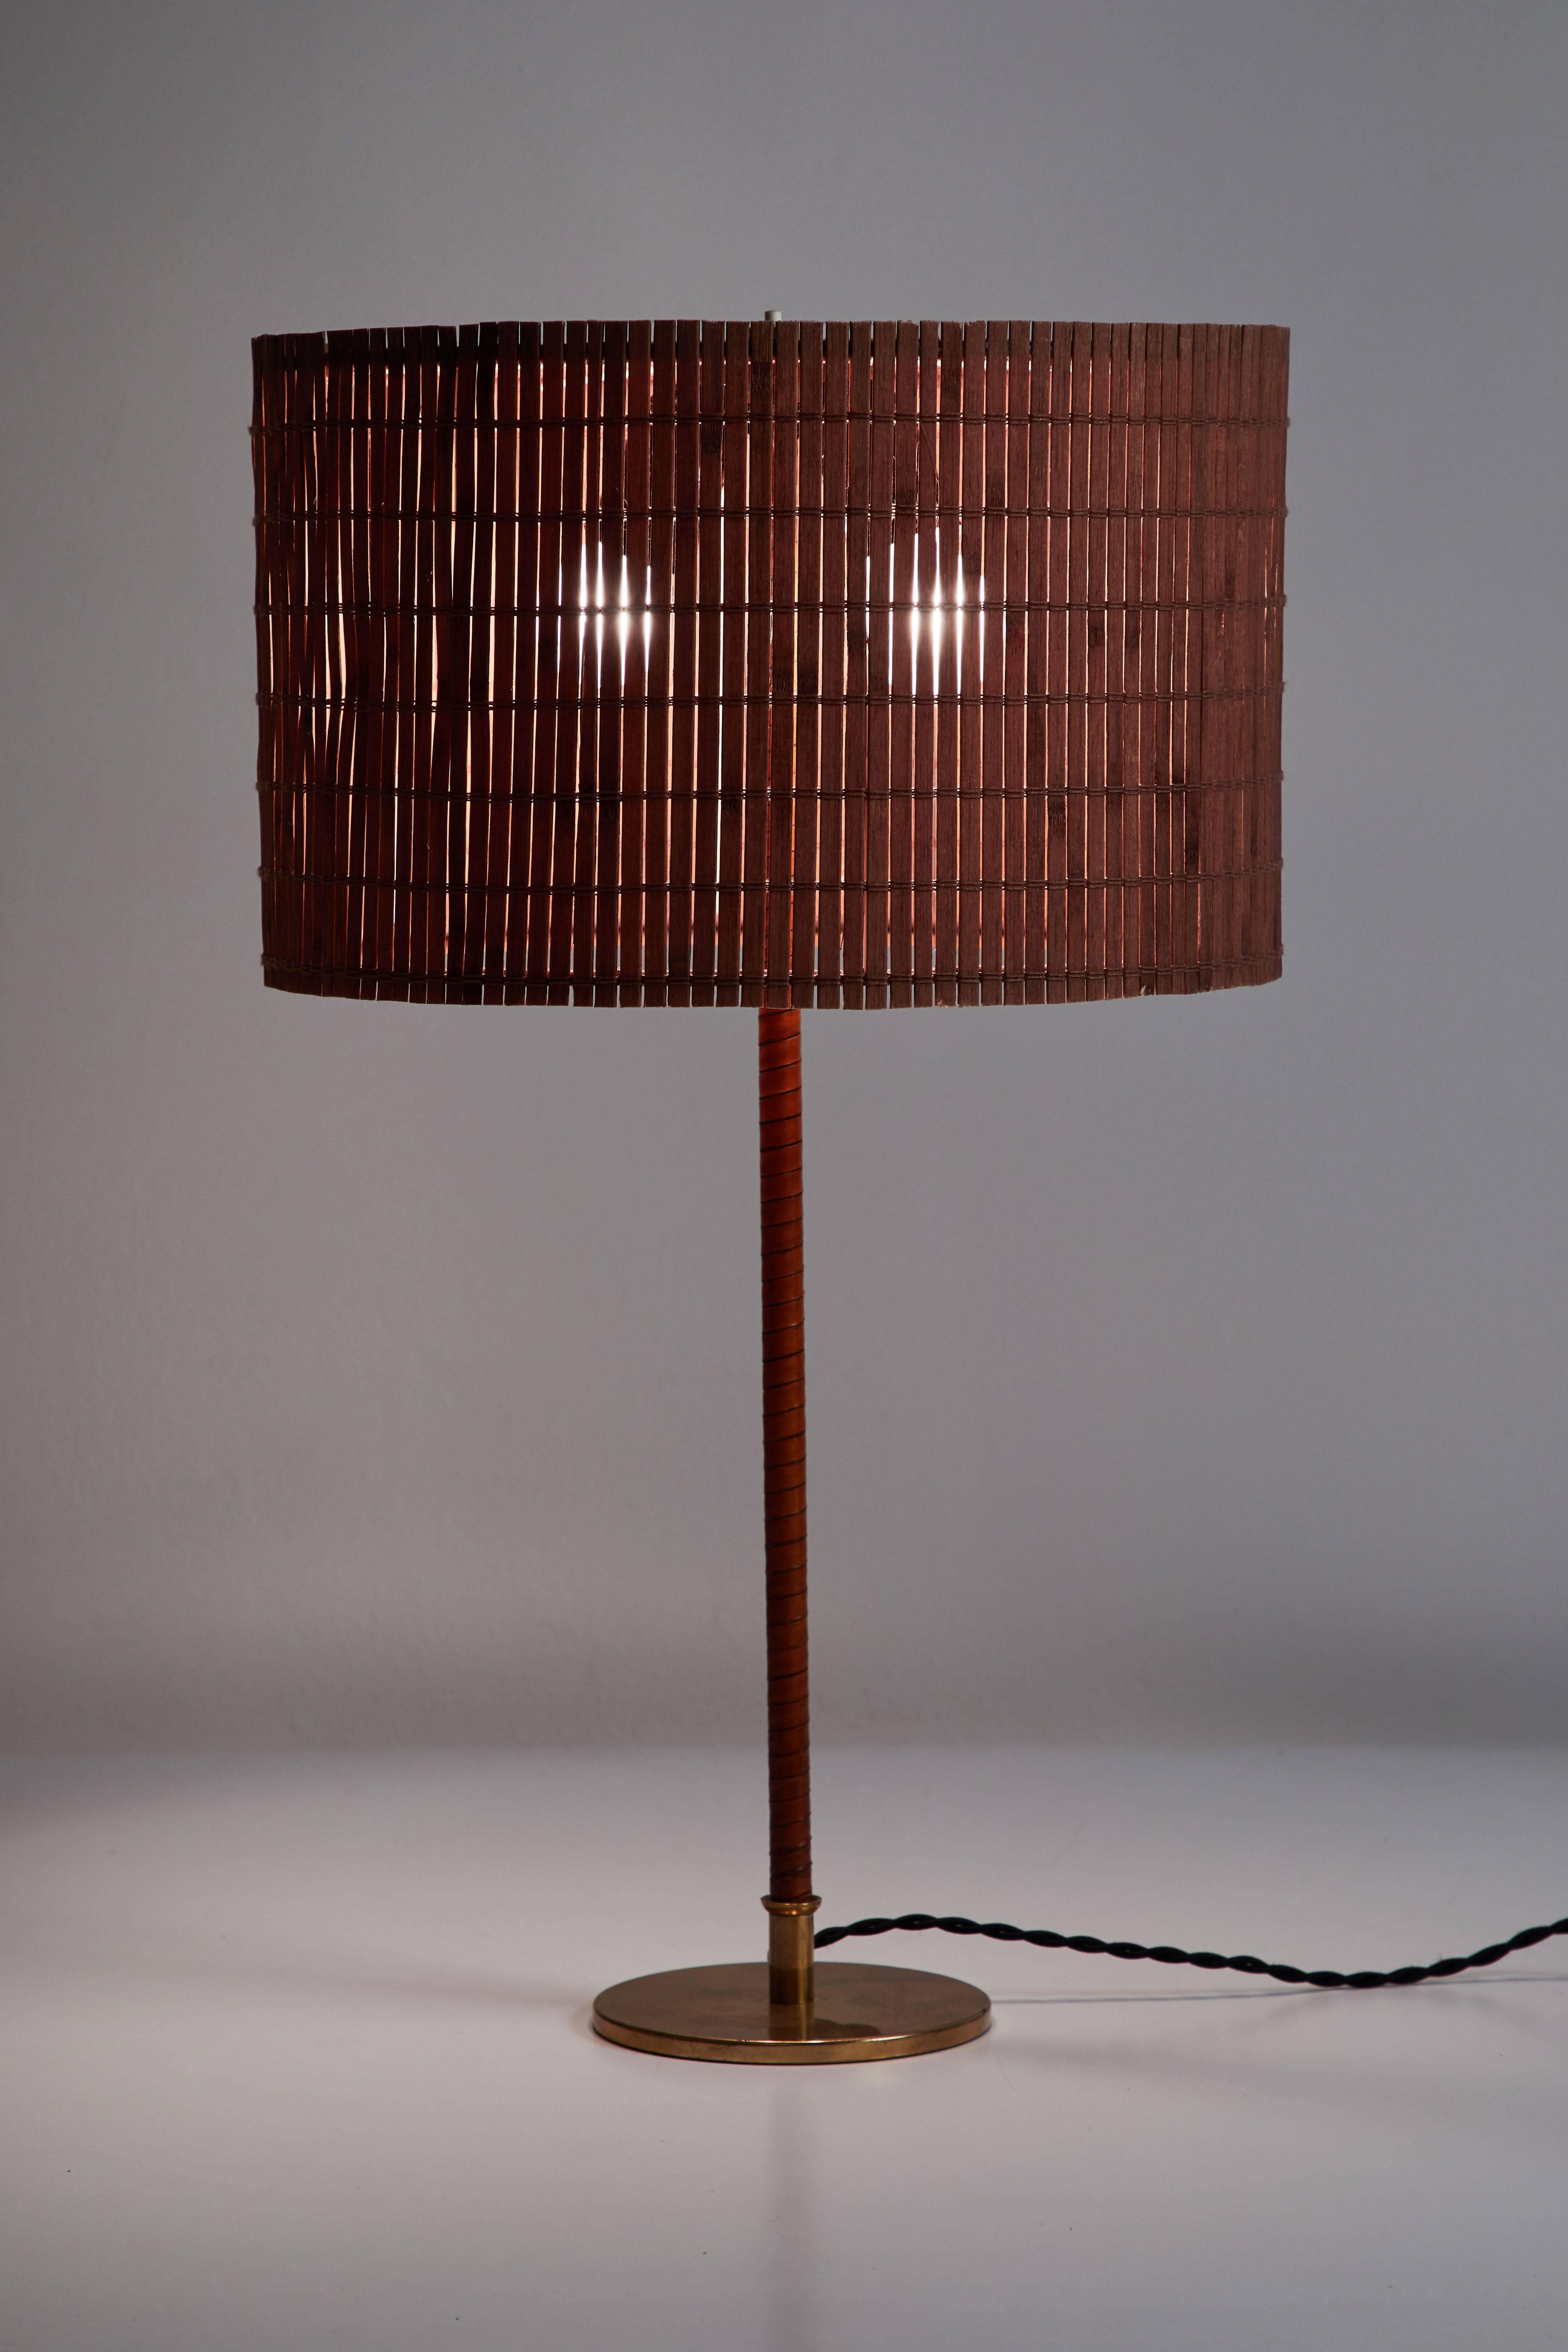 Model 9205 table lamp by Paavo Tynell for Taito Oy designed and manufactured in Finland, circa 1950s. Brass stem wrapped with leather, cane shade. Rewired with French twist silk cord. Takes one E27 75w maximum bulb.